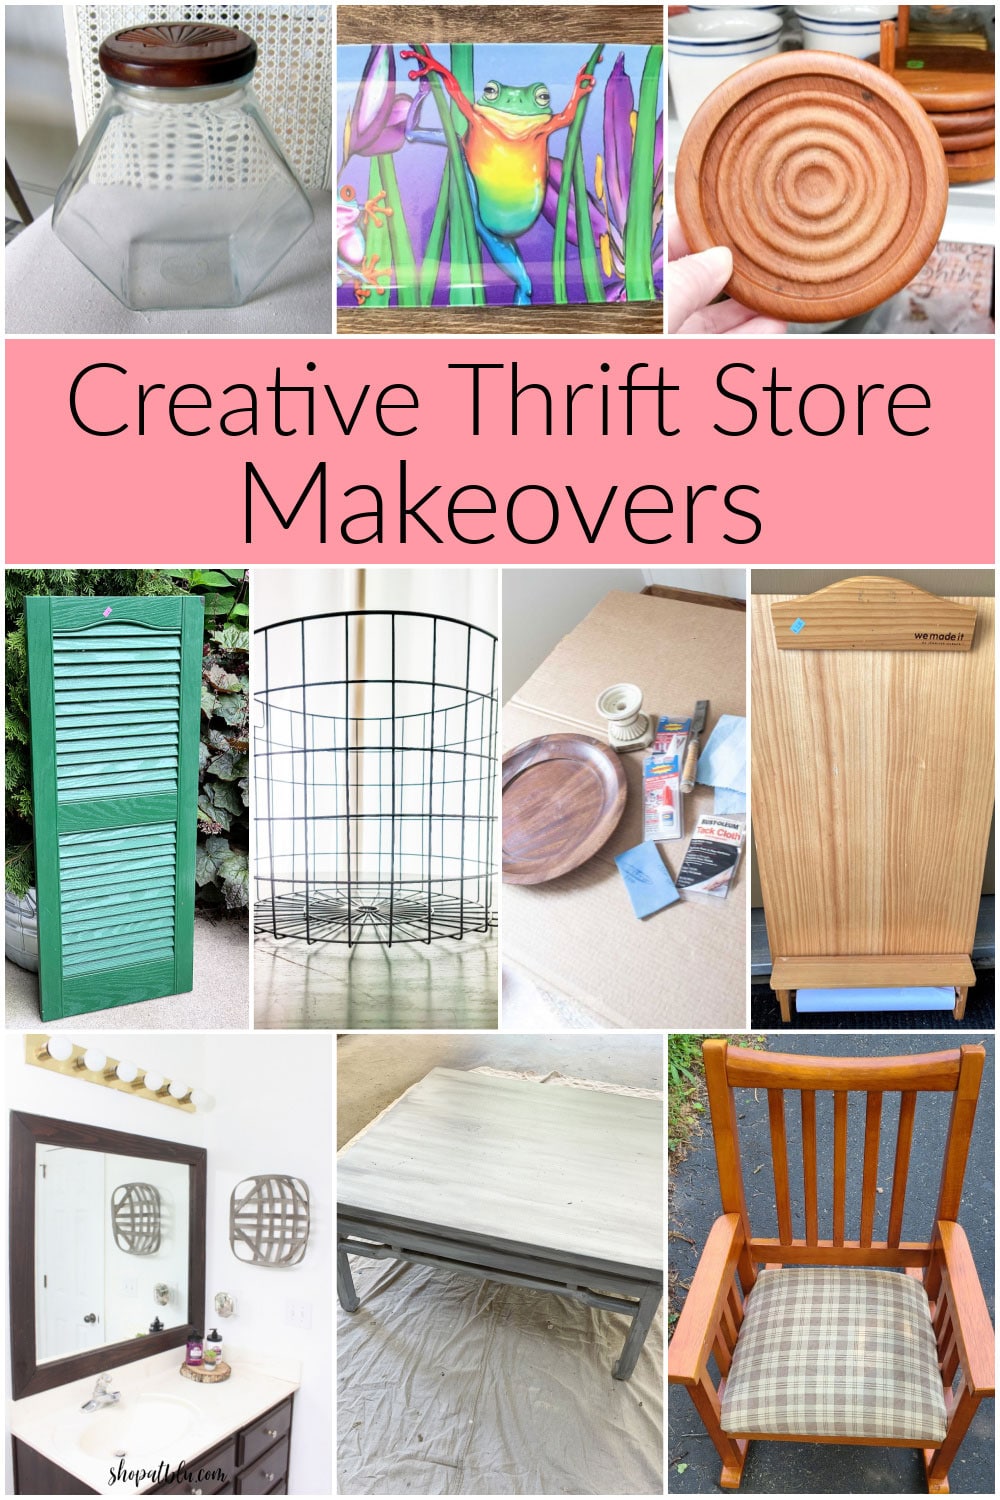 Creative thrift store makeovers.